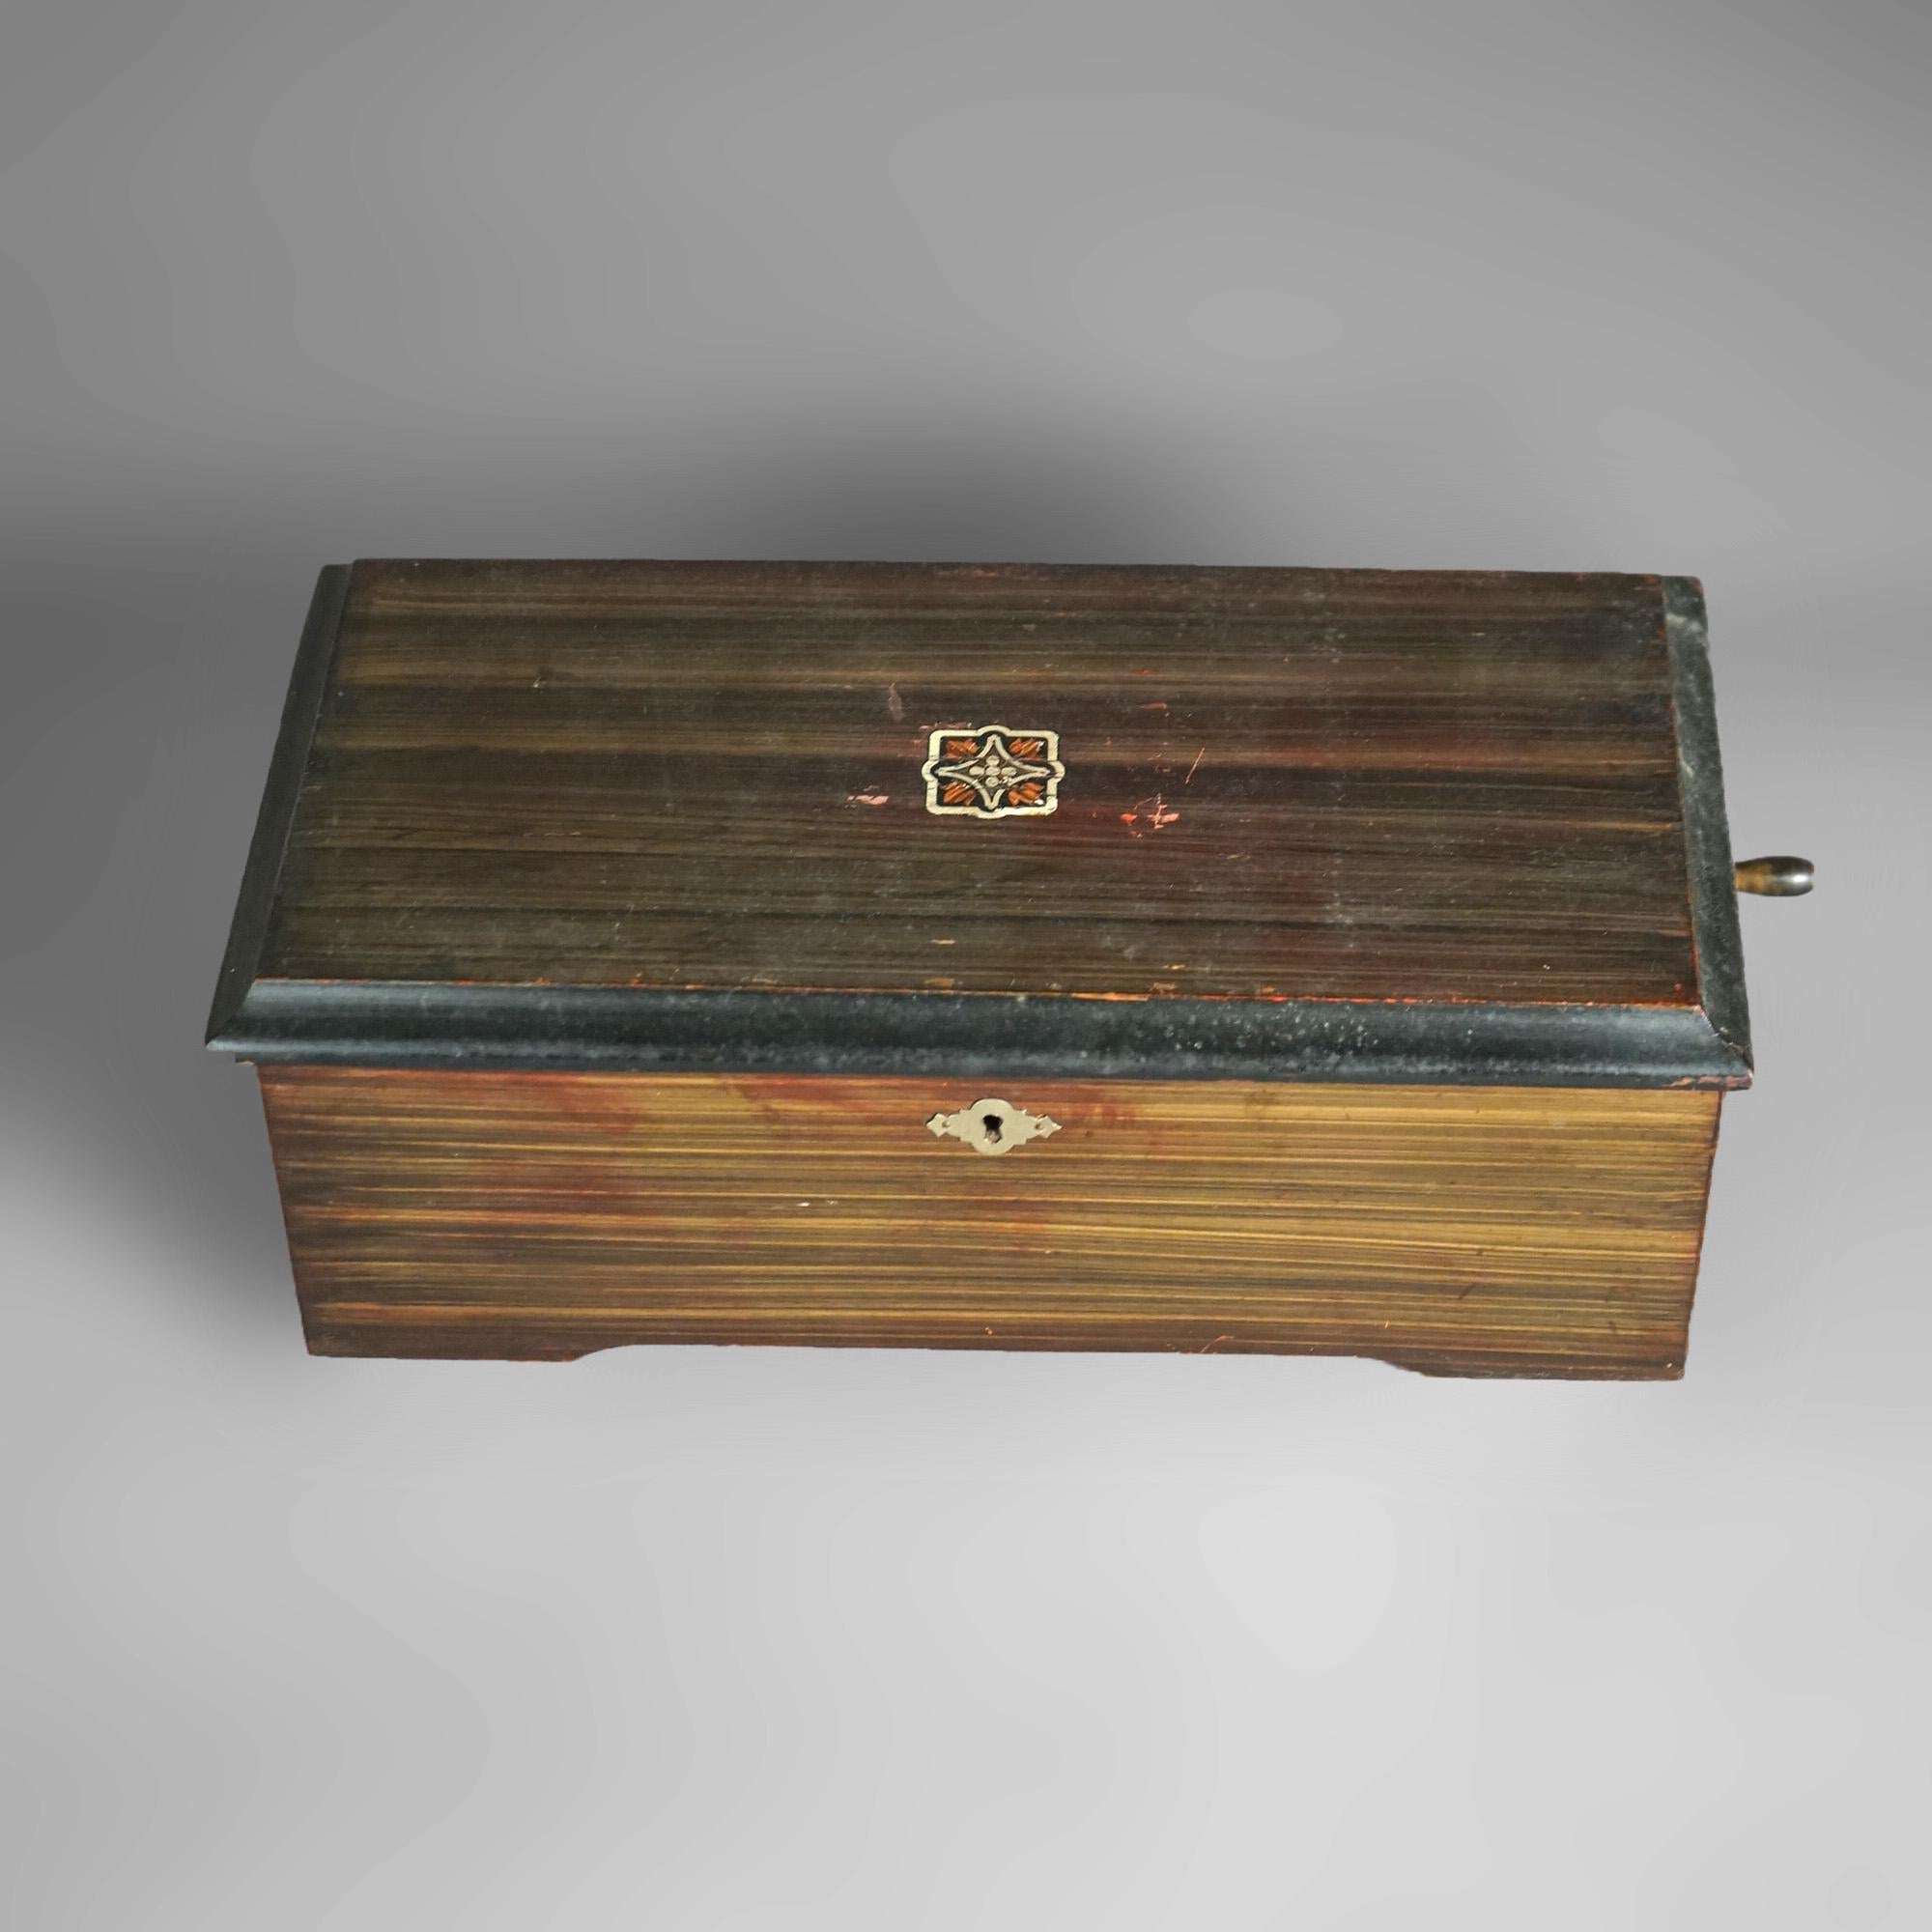 Hand-Painted Antique Faux Grain Painted Swiss Six-Tune Music Box with Tune Card Circa 1890